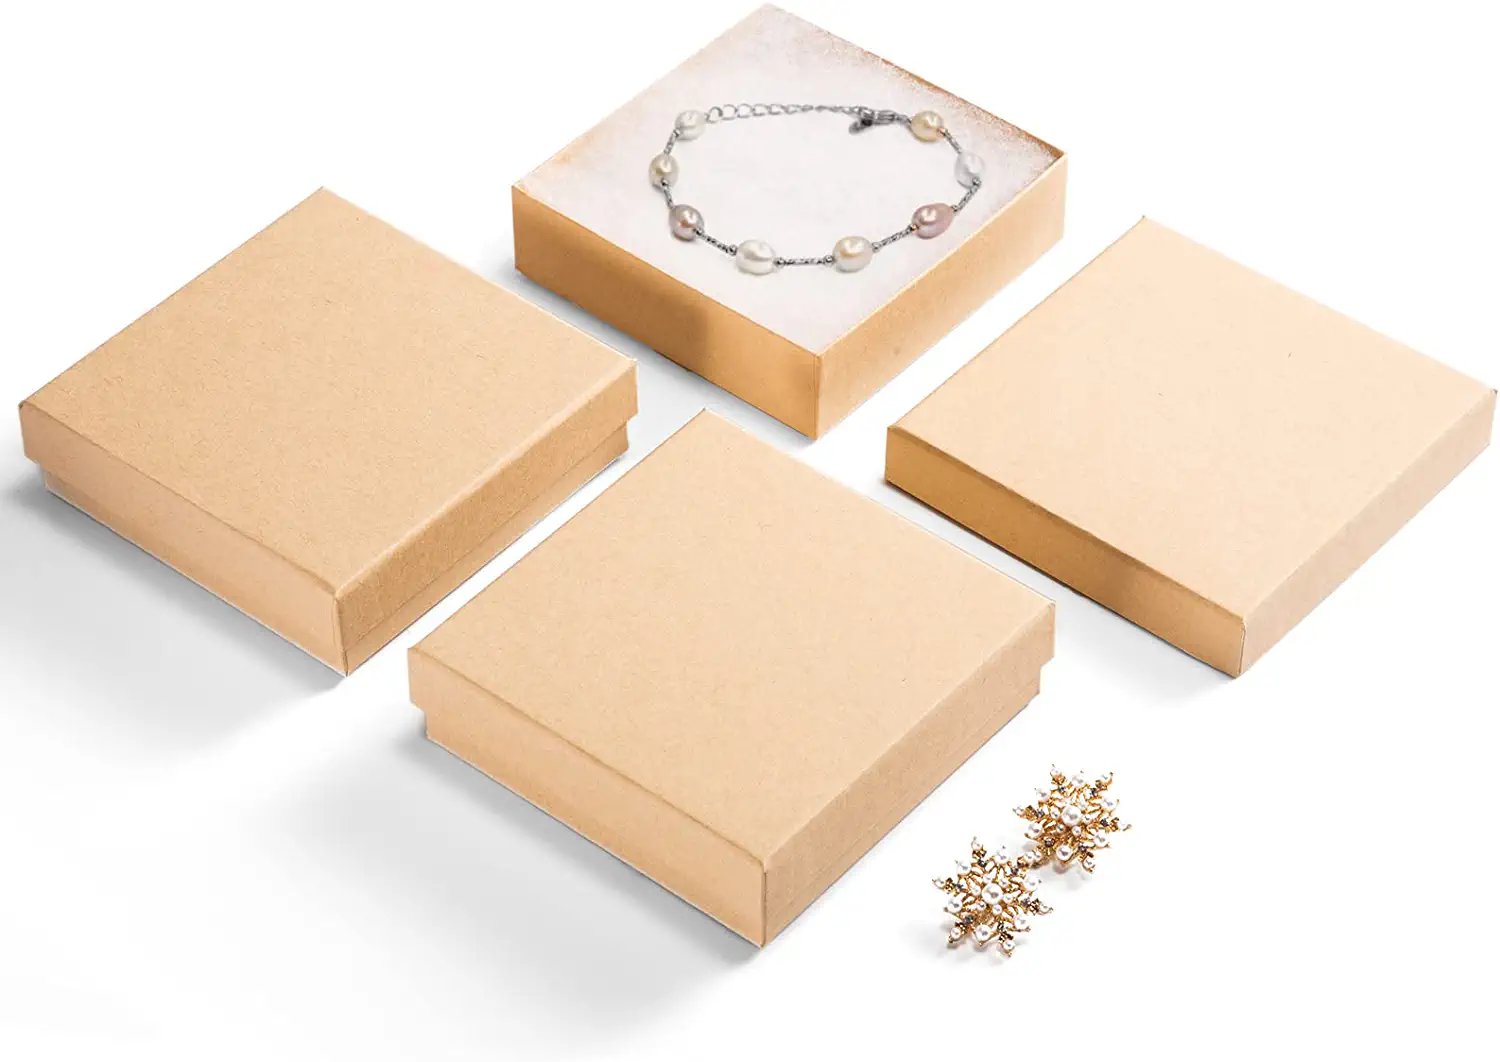 Cardboard Jewelry Boxes Shipping Small Gift Lids 3.5X3.5X1" Inch 20 Pieces